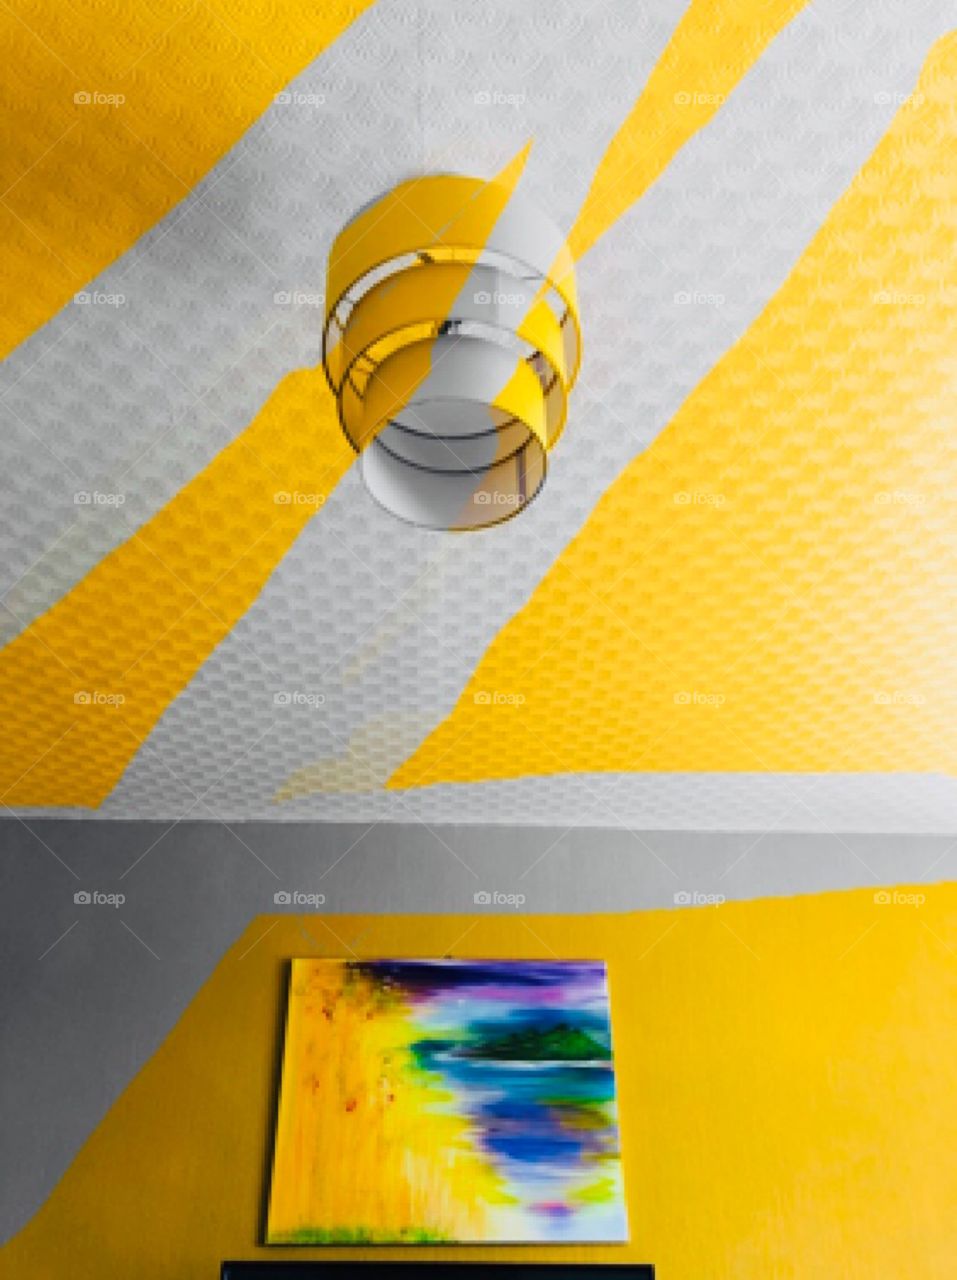 Colour clash with light shade ceiling wall and painting 